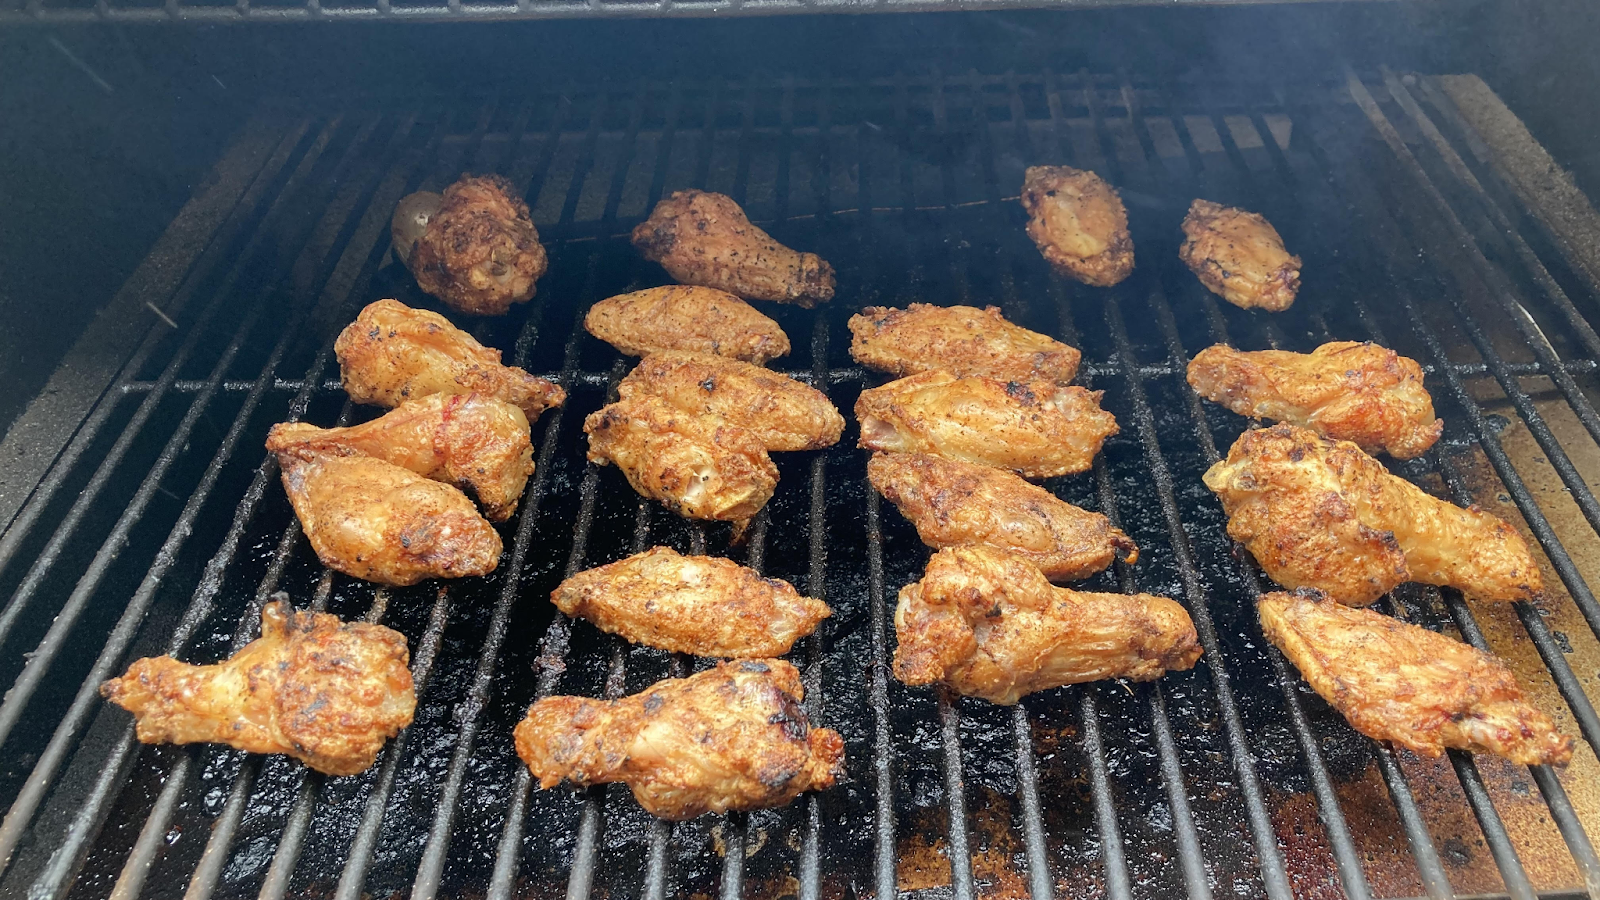 Griller's Gold Smoked Wings - chicken wings on the grill spaced evenly